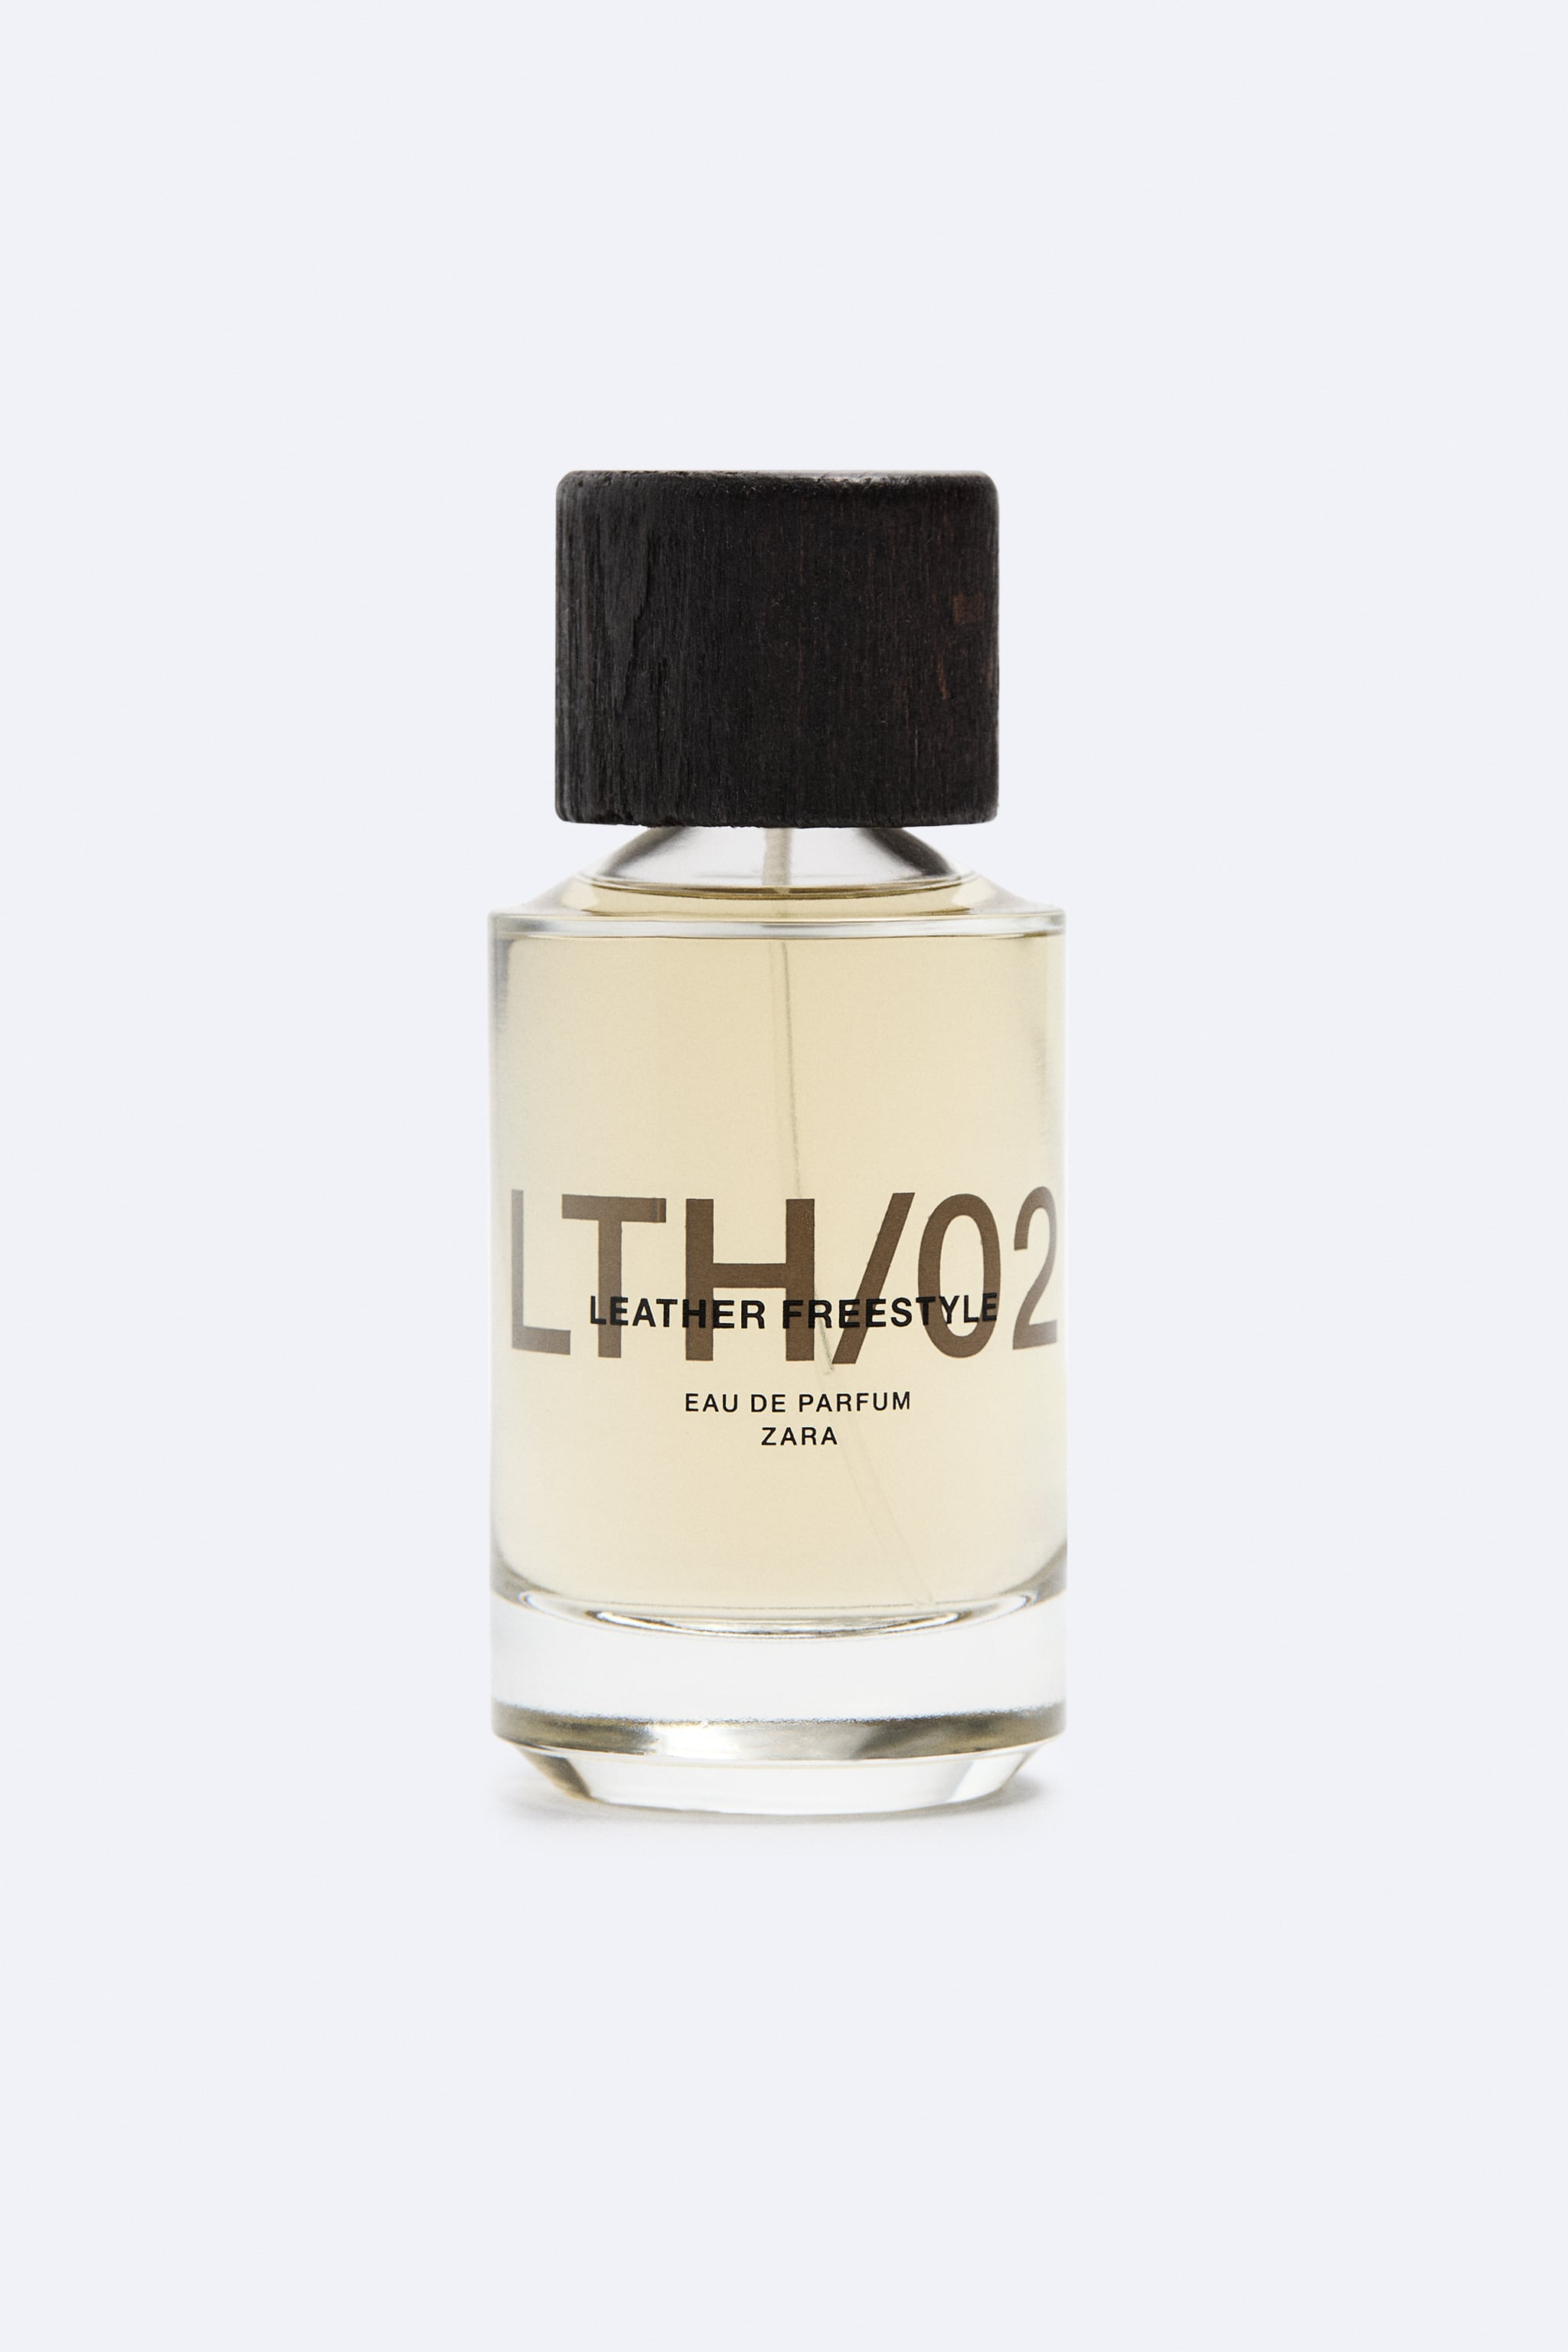 LTH/02 LEATHER FREESTYLE 100 ML